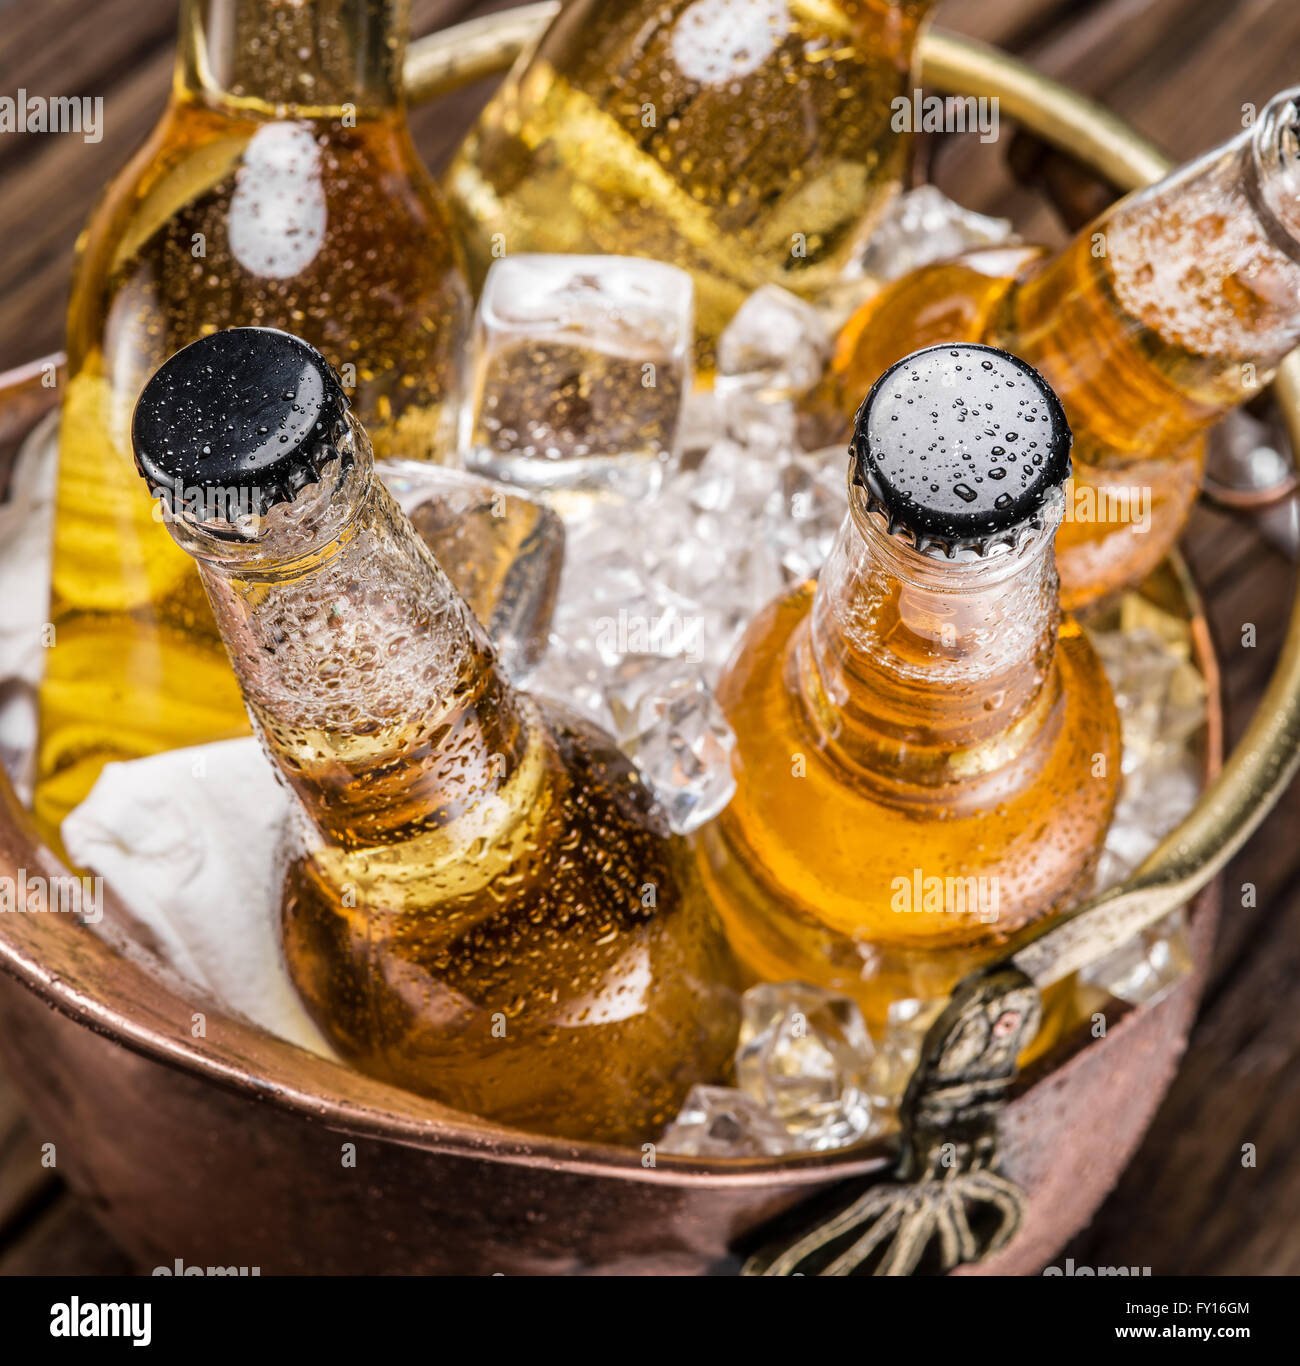 Cold bottles of beer in the brazen bucket on the wooden table. Stock Photo